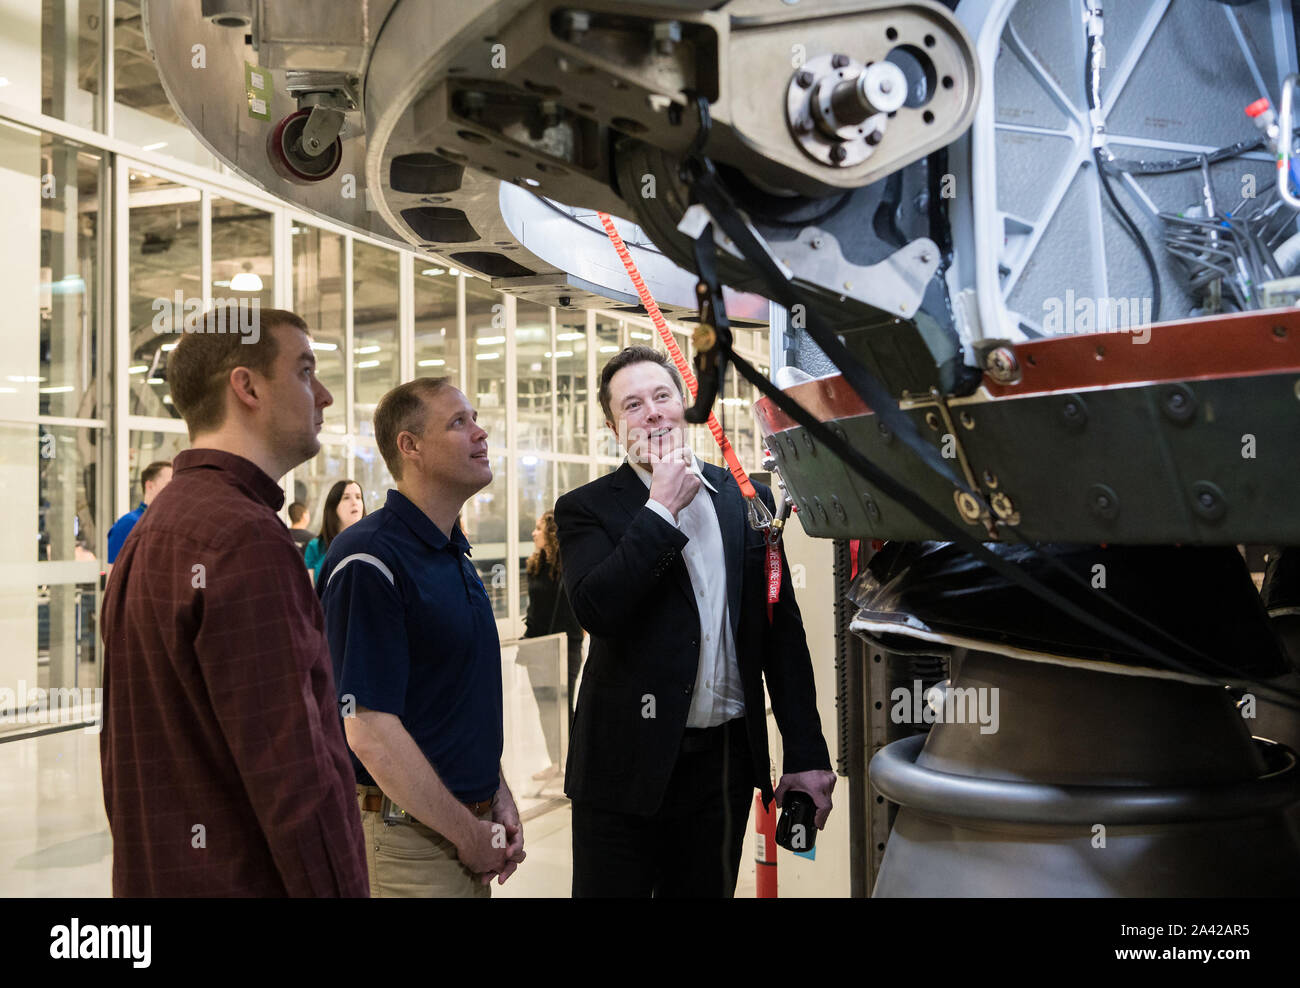 Hawthorne, United States. 11th Oct, 2019. NASA Administrator Jim Bridenstine, center, speaks to SpaceX Chief Engineer Elon Musk, right, while viewing the OctaWeb, part of the Merlin engine used for the Falcon rockets, during a tour of the SpaceX Headquarters on October 10, 2019, in Hawthorne, CA. NASA Photo by Aubrey Gemignani/UPI Credit: UPI/Alamy Live News Stock Photo